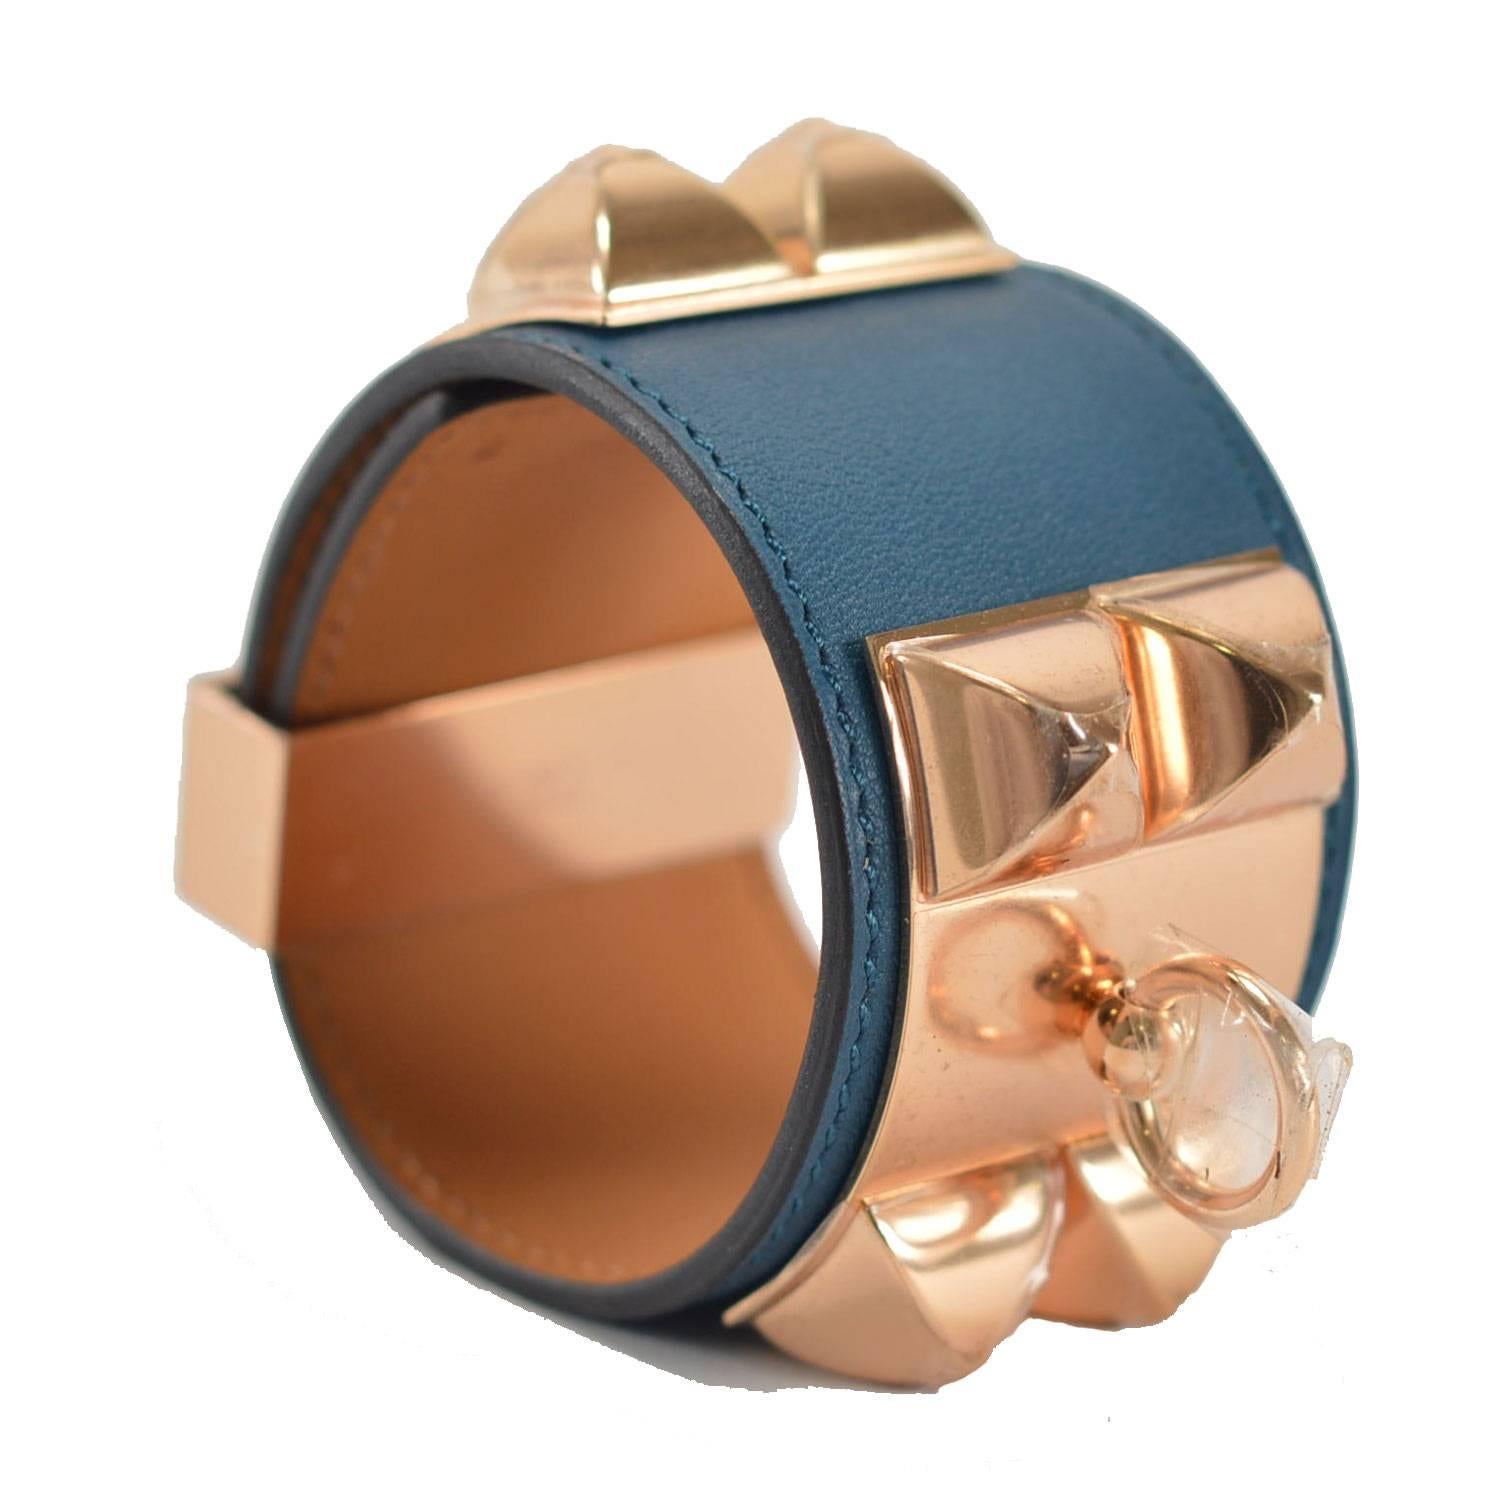 Hermes Bracelet "Dog Collar; (CDC);Collier de Chien; Swift Leather Blue Colvert Color Rose Gold Plated Hardware 2015.

Pristine Condition. Pre-owned and never user.

Bought in Hermes store in 2015. 

Composition: Swift Leather.

Model: Collier